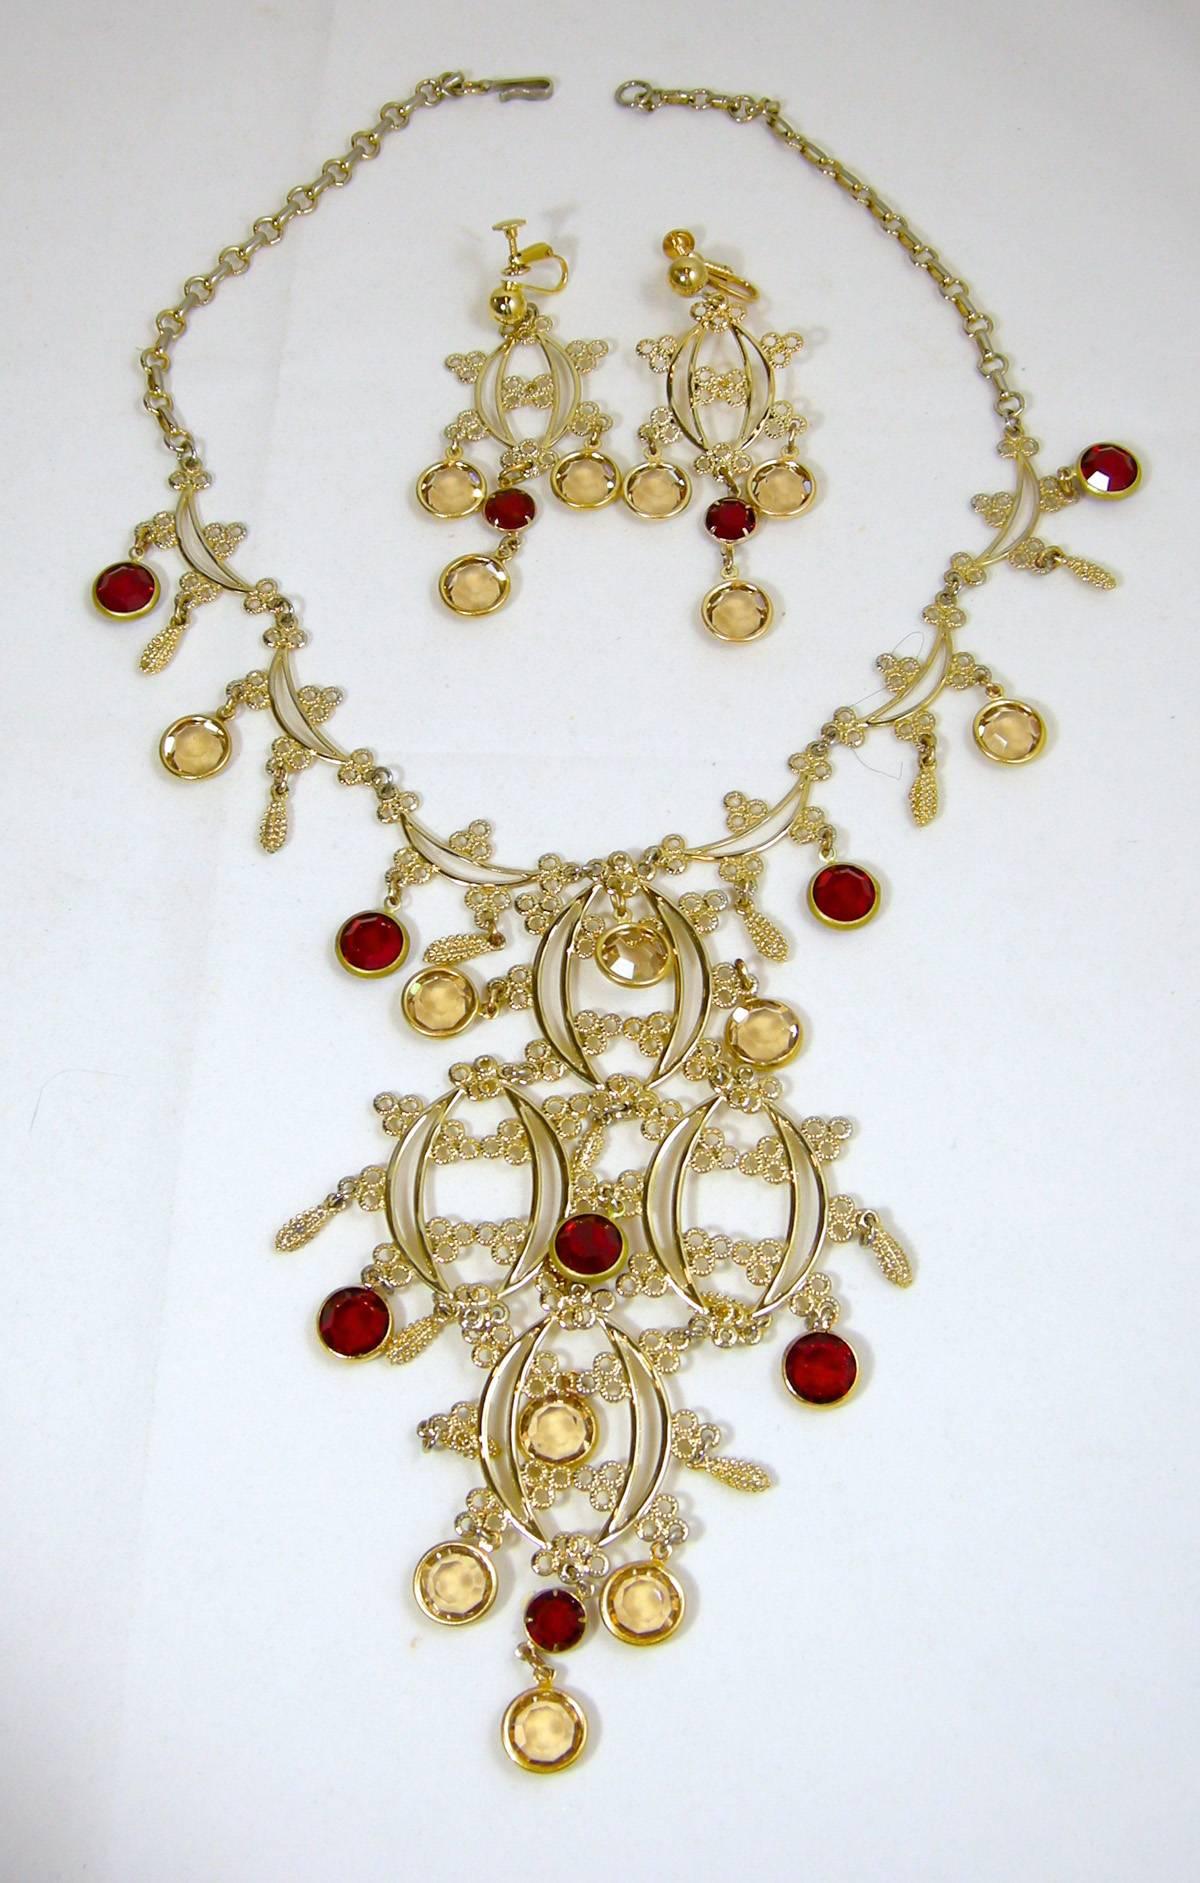 This huge1960s Hobe crystal bib necklace set has faux ruby and citrine crystals dangling from it with an open work design. In a gold tone setting, it measures 17” x 1/4”. The bib measures 5” x 3”.  It has a hook closure. The matching clip earrings